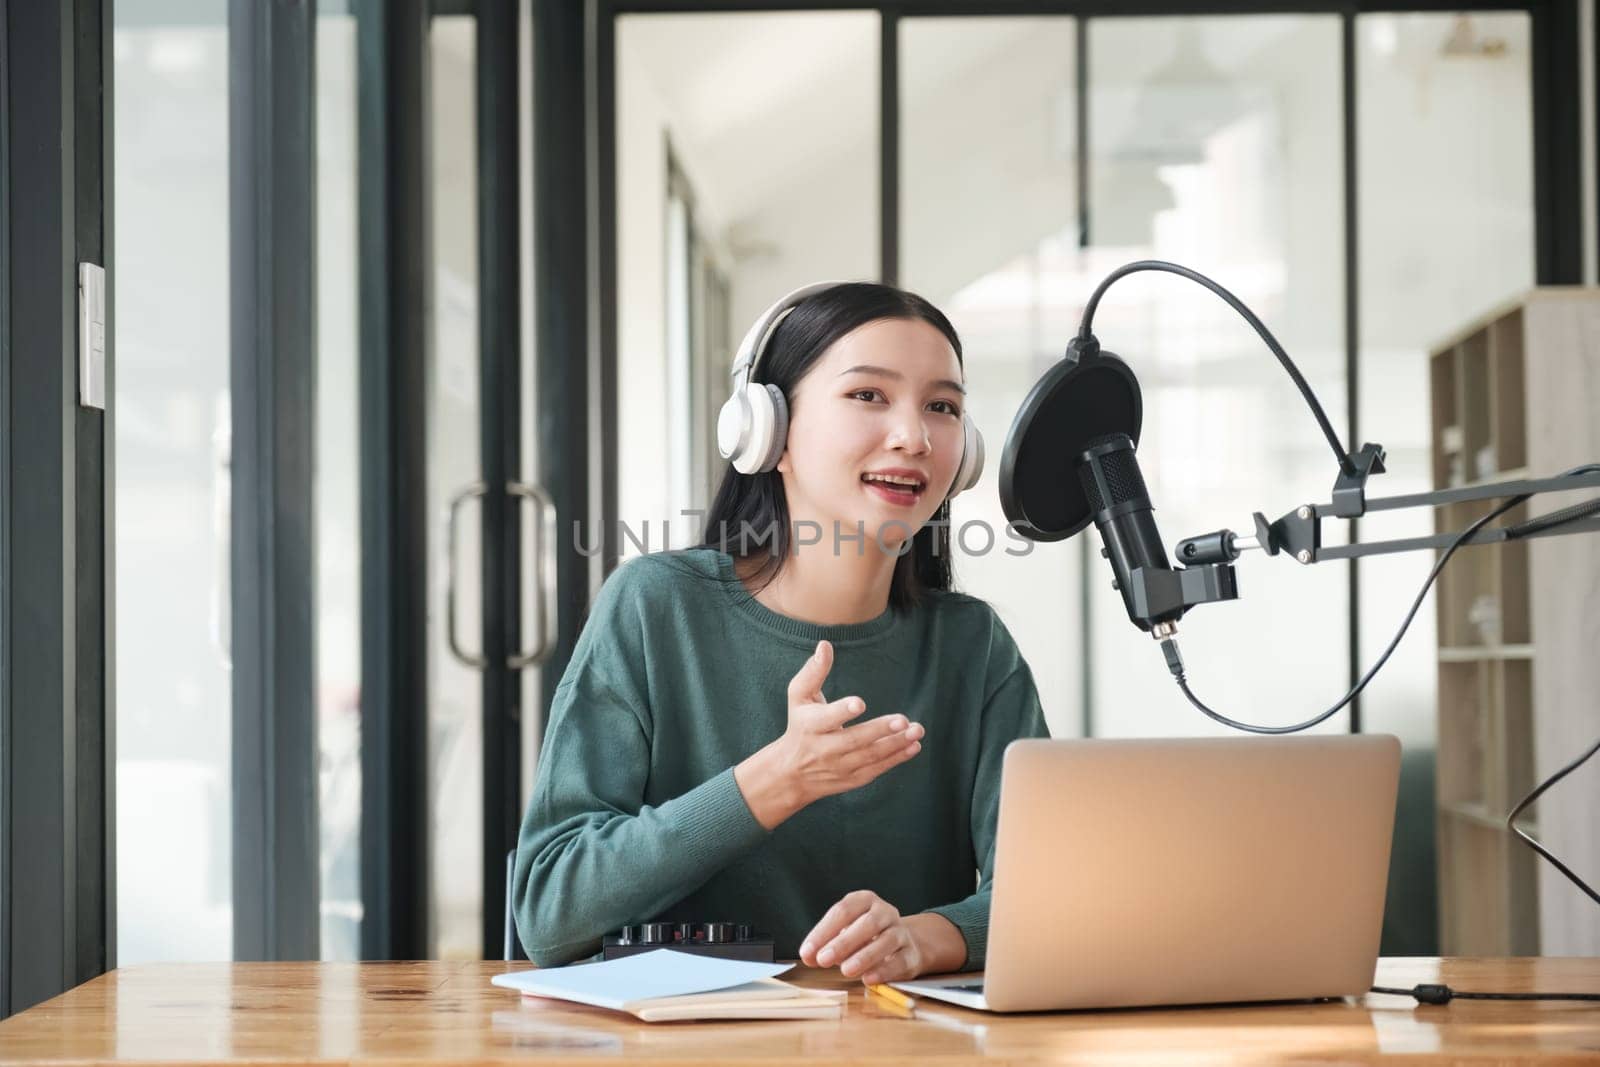 A woman is sitting at a desk with a laptop and a microphone. She is wearing headphones and she is talking into the microphone. The scene suggests that she might be a radio host or a podcast host